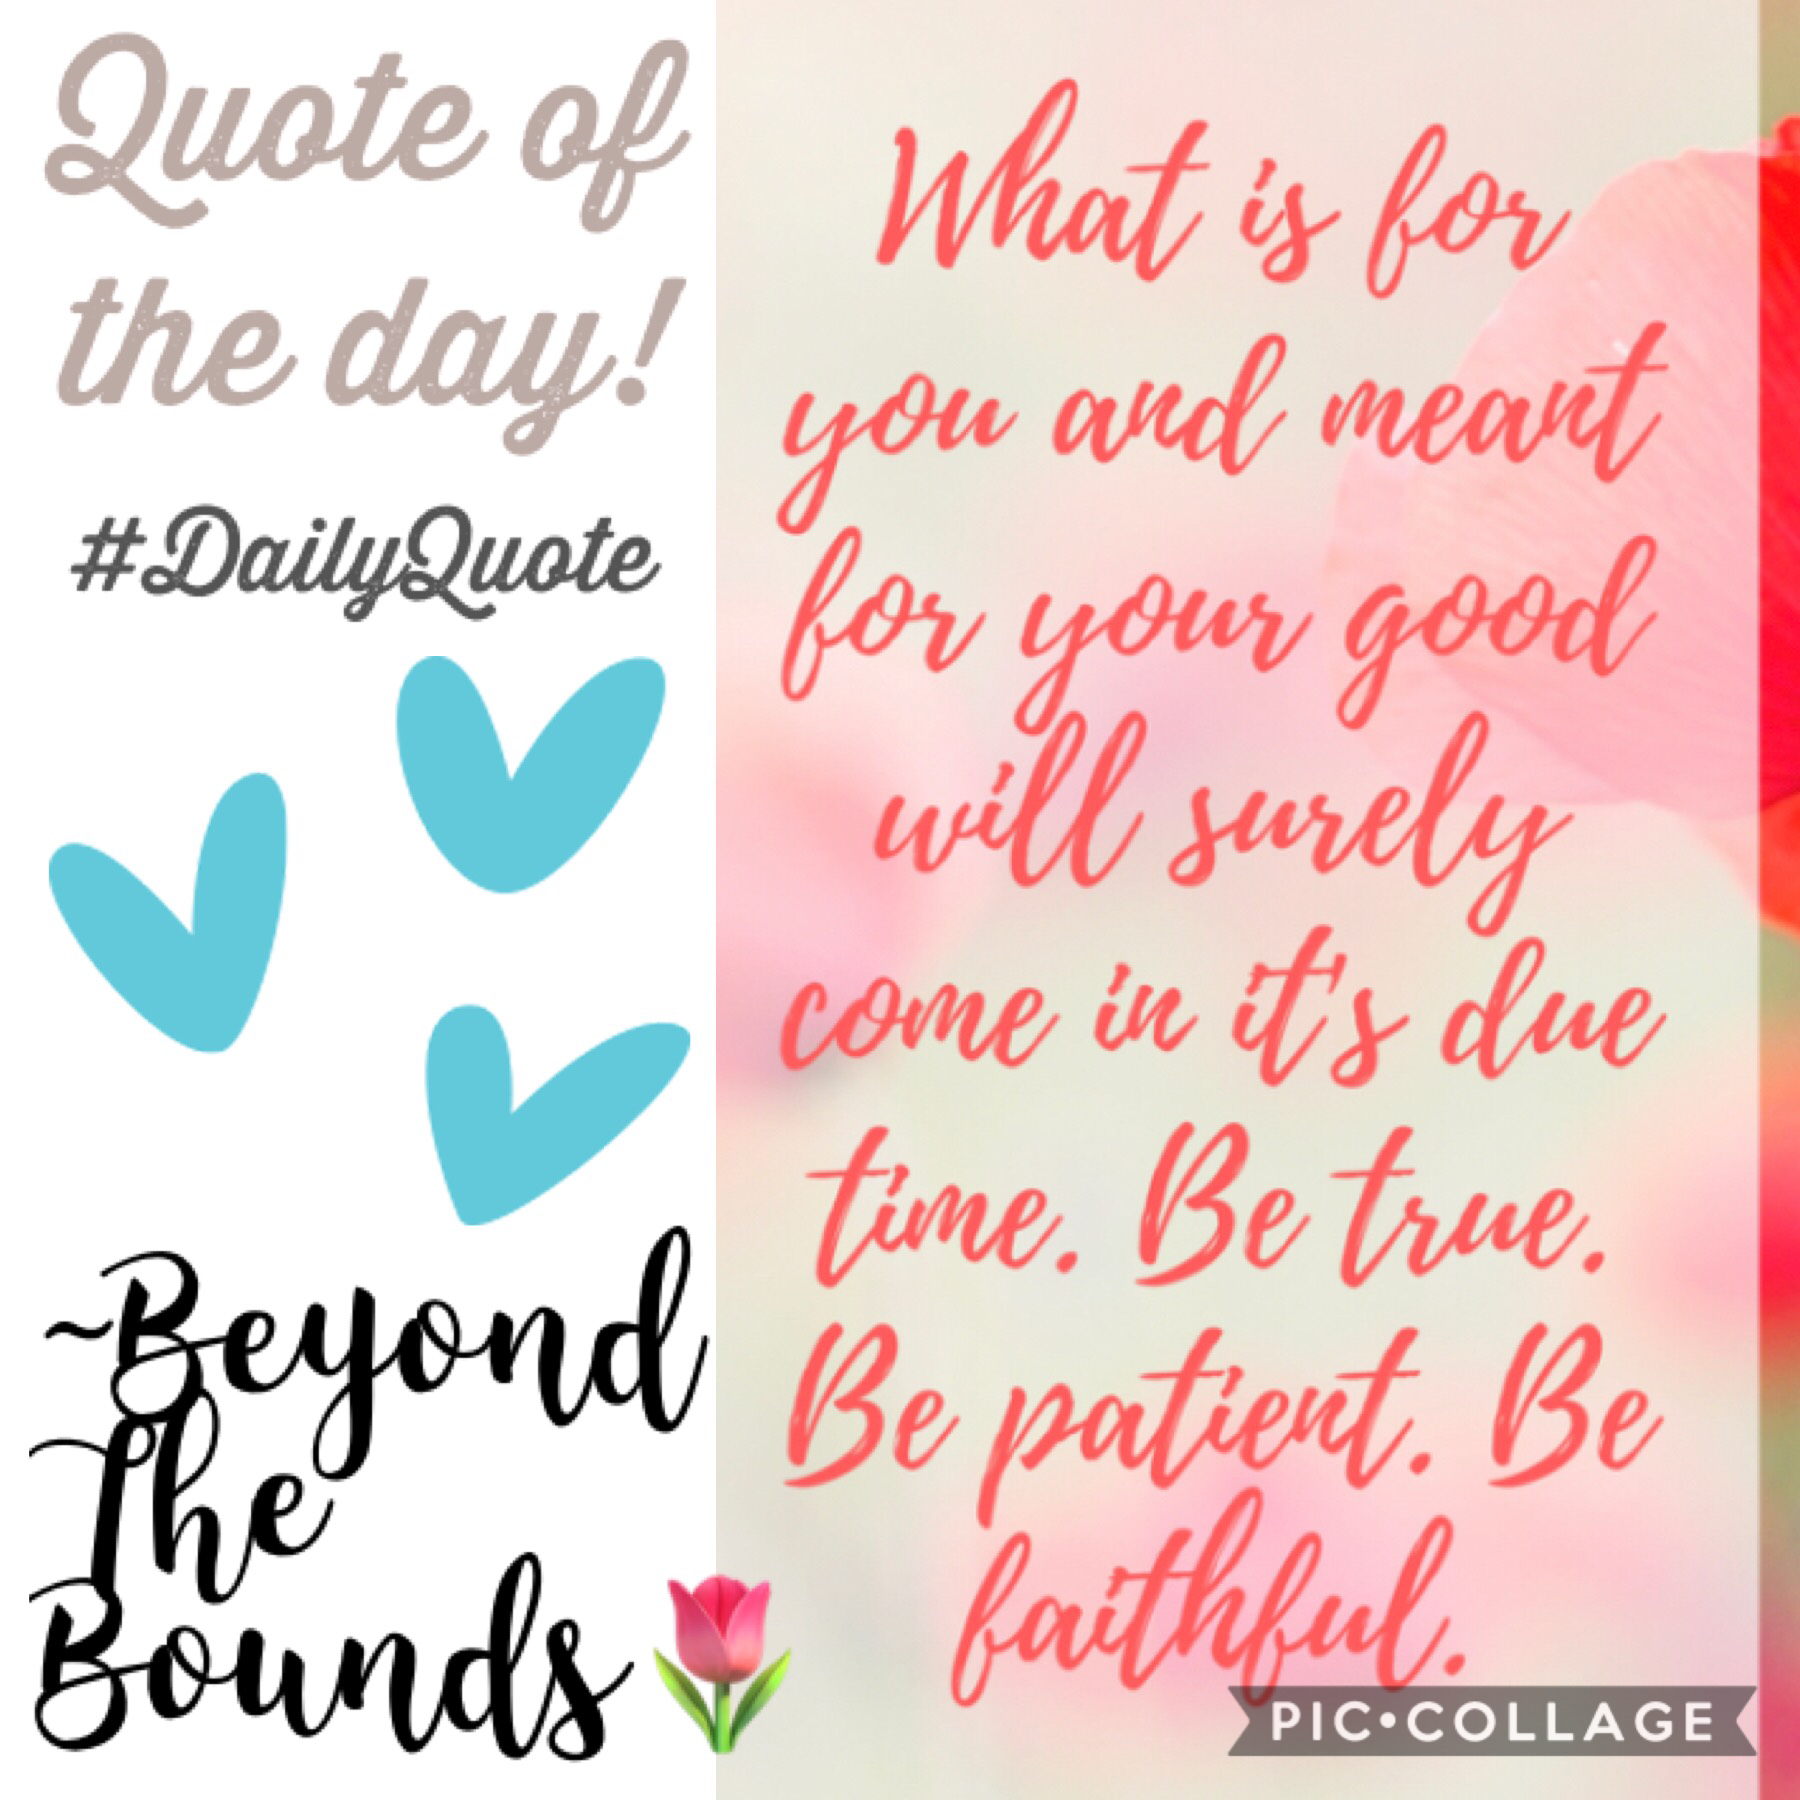 🌷Tap🌷
Is this quote motivating you? Let me know through the comments...
Lots of love,
Beyond The Bounds🦋